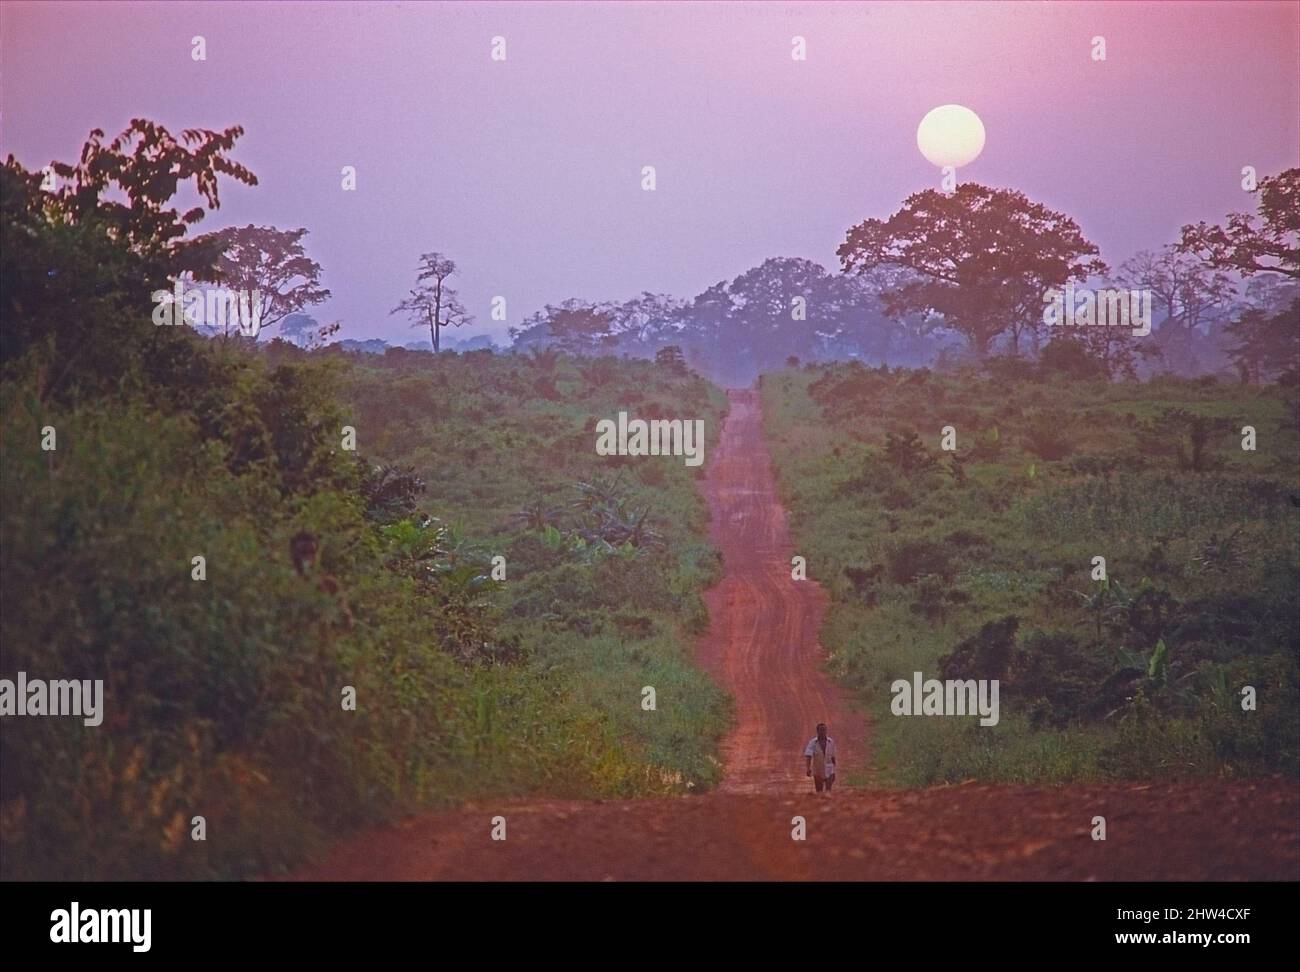 Dust road through the scrubland in Ghana, West Africa. Stock Photo